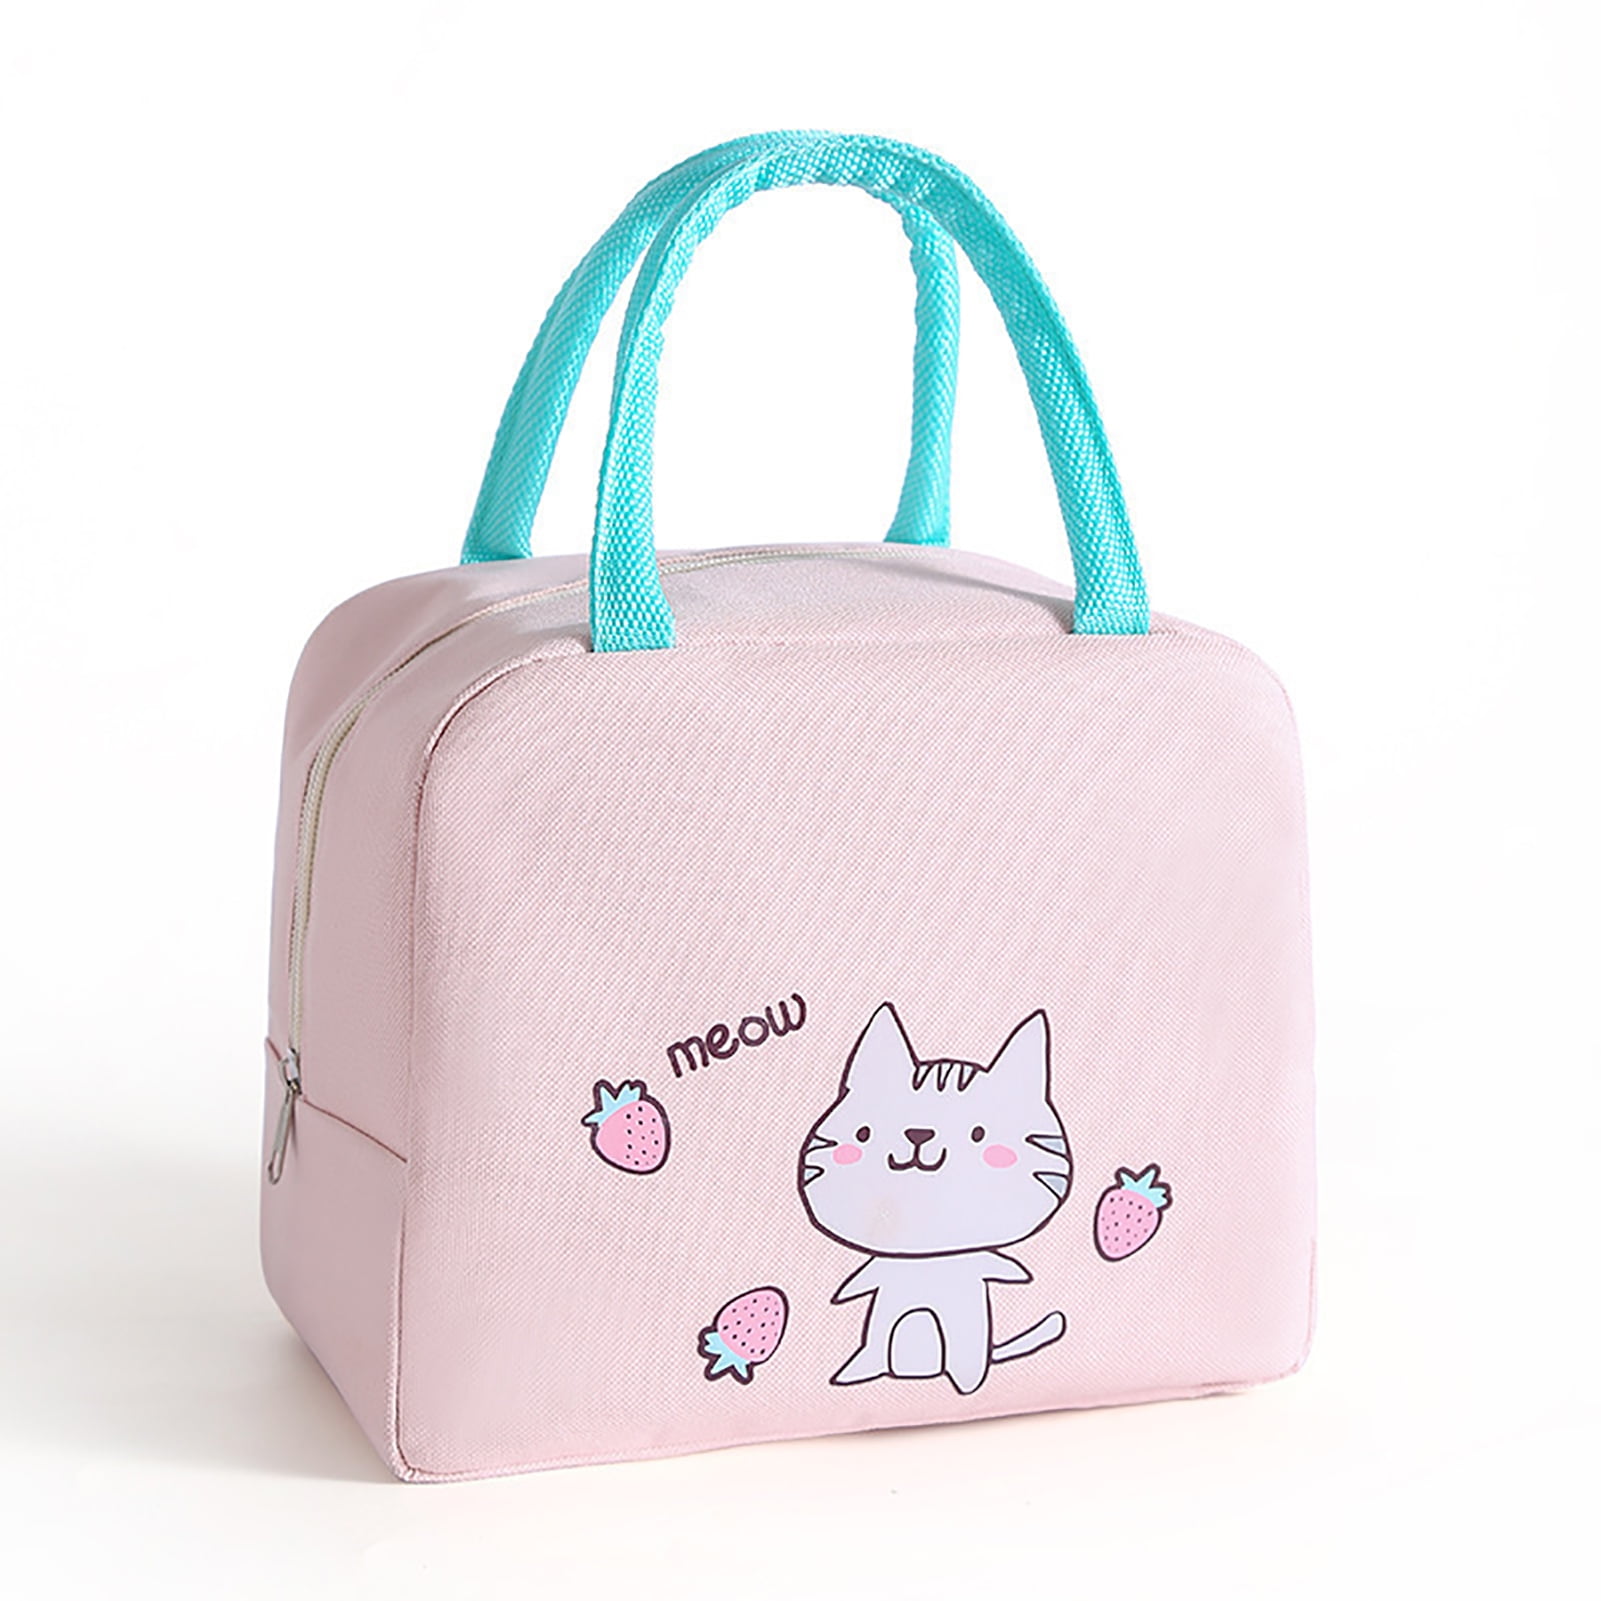 Onled Funny Kitty Cat Lunch Bag Insulated Freezable Cute Kitten Paw Prints Lunch Tote Cooler Handbag Lunch Box for Women Men Picnic Travel Portable Lunch Kit Reusable 